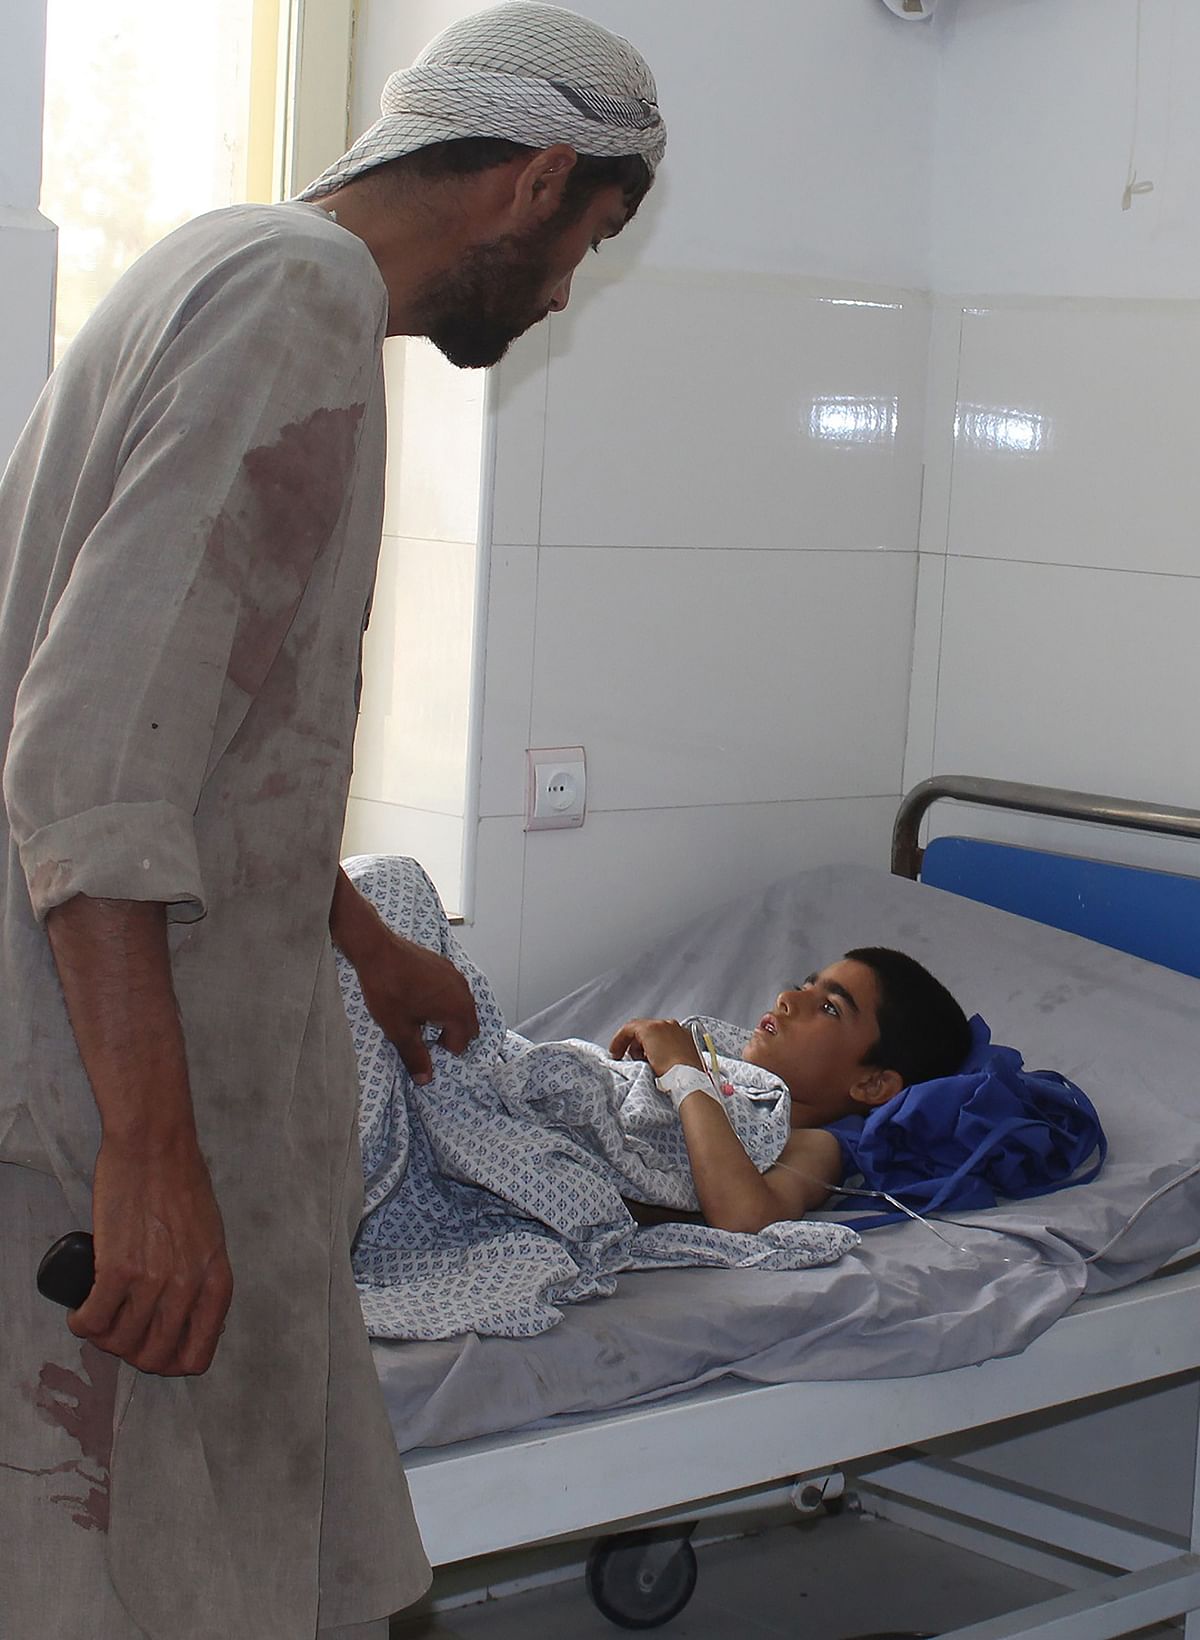 An Afghan boy receives treatment at a hospital in Kunduz on 3 April, 2018, a day after an airstrike hit a school in a Taliban stronghold. An Afghan airstrike on a religious school in a Taliban stronghold on 2 April caused multiple casualties, including civilians, Afghan officials and witnesses said. Photo: AFP.